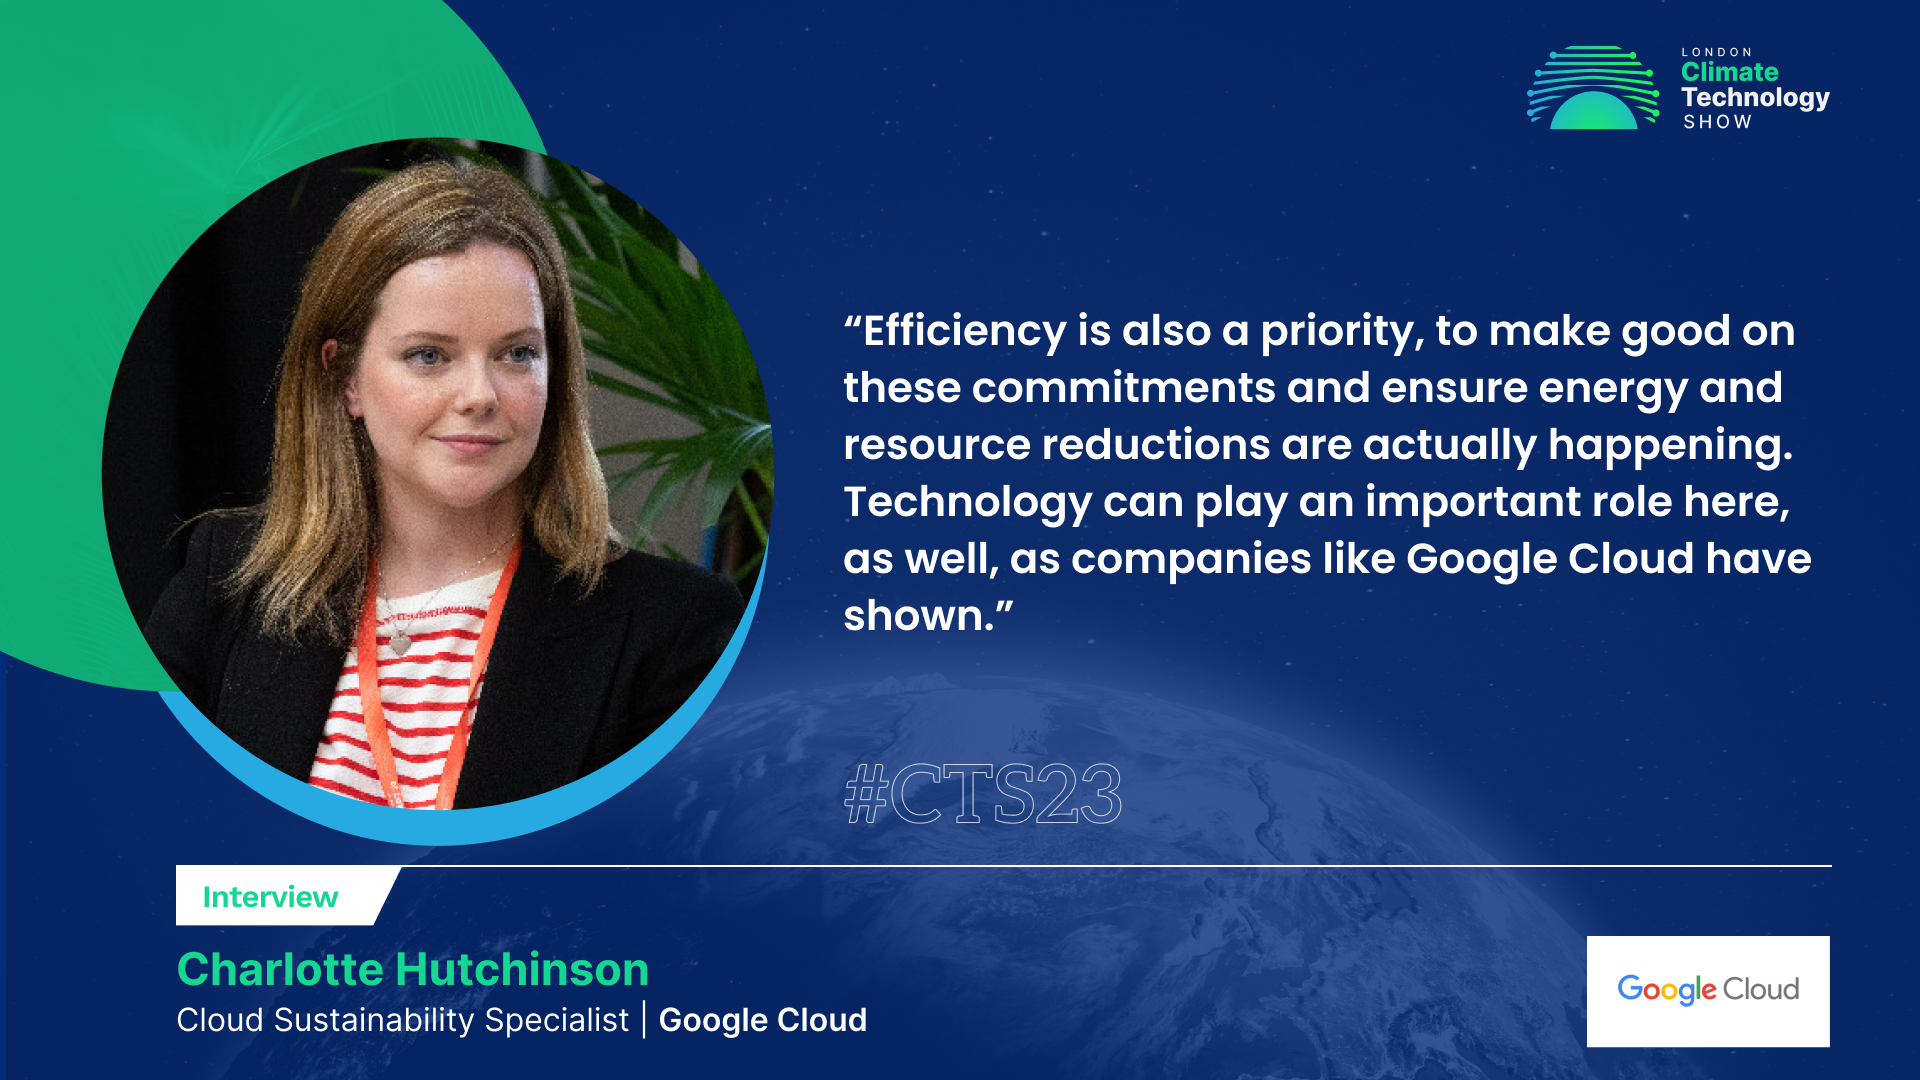 An Informative Q&A Session with Charlotte Hutchinson, Google Cloud Sustainability Specialist